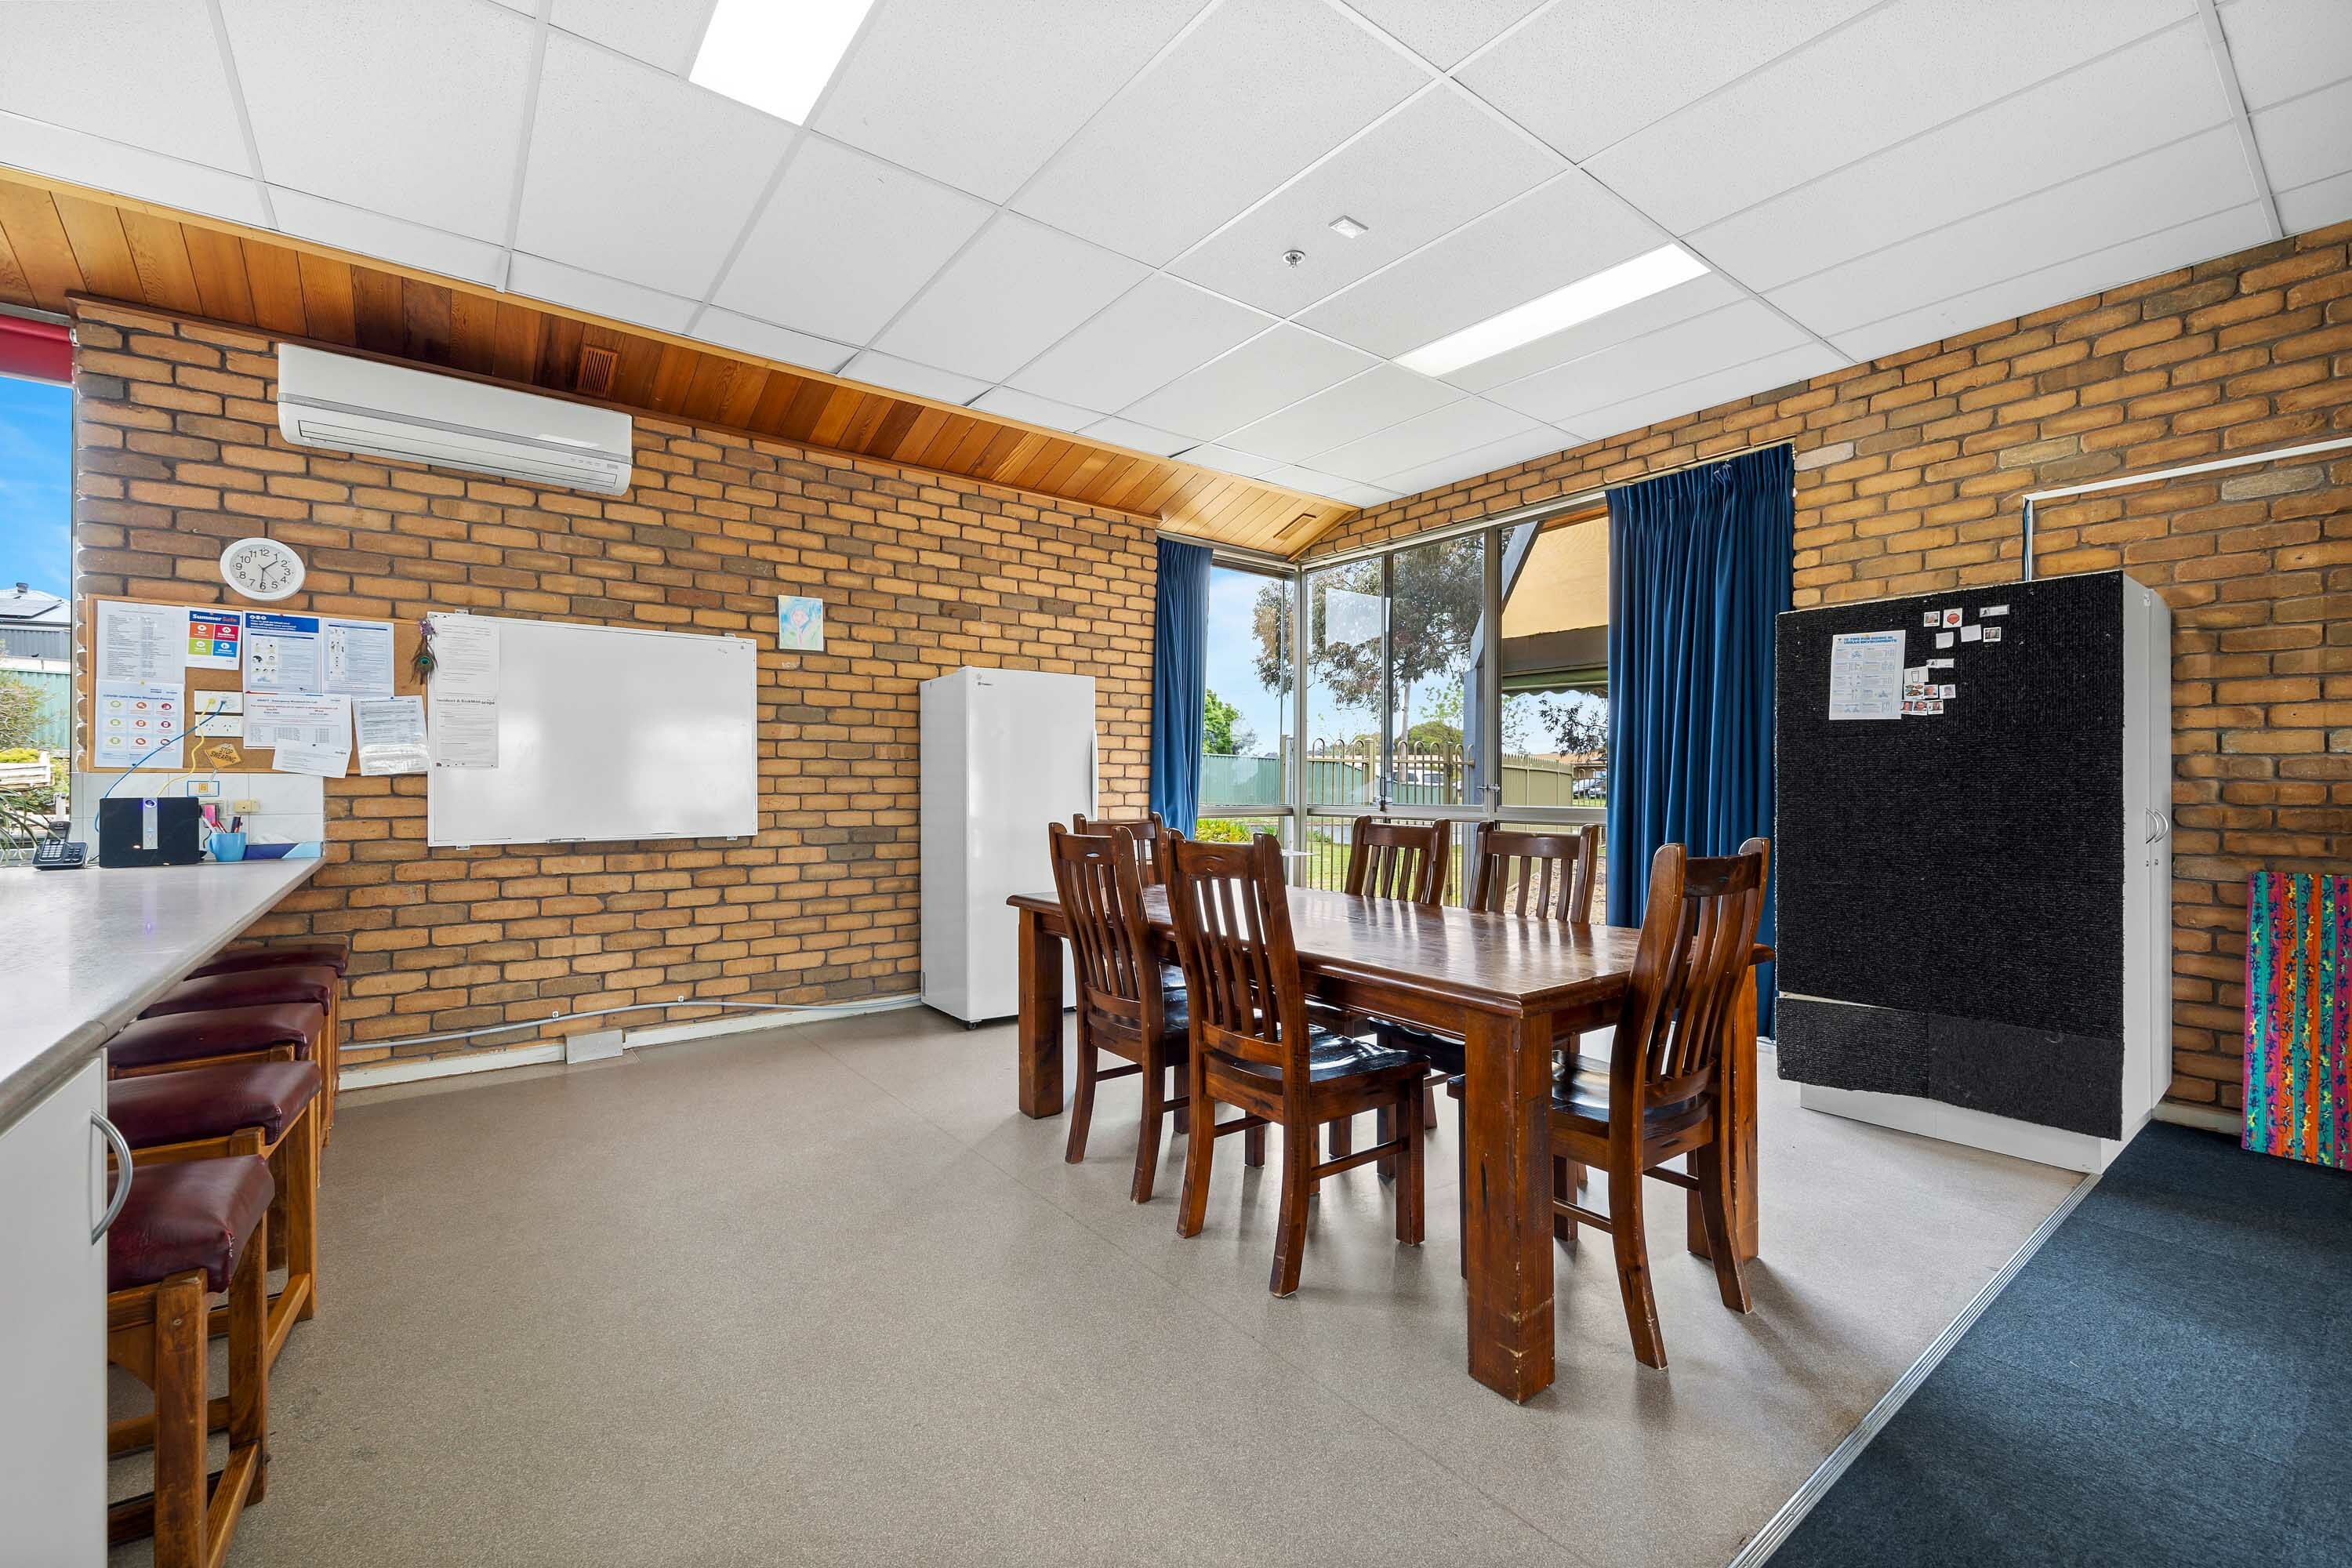 Dining area with brick wall and large black fridge